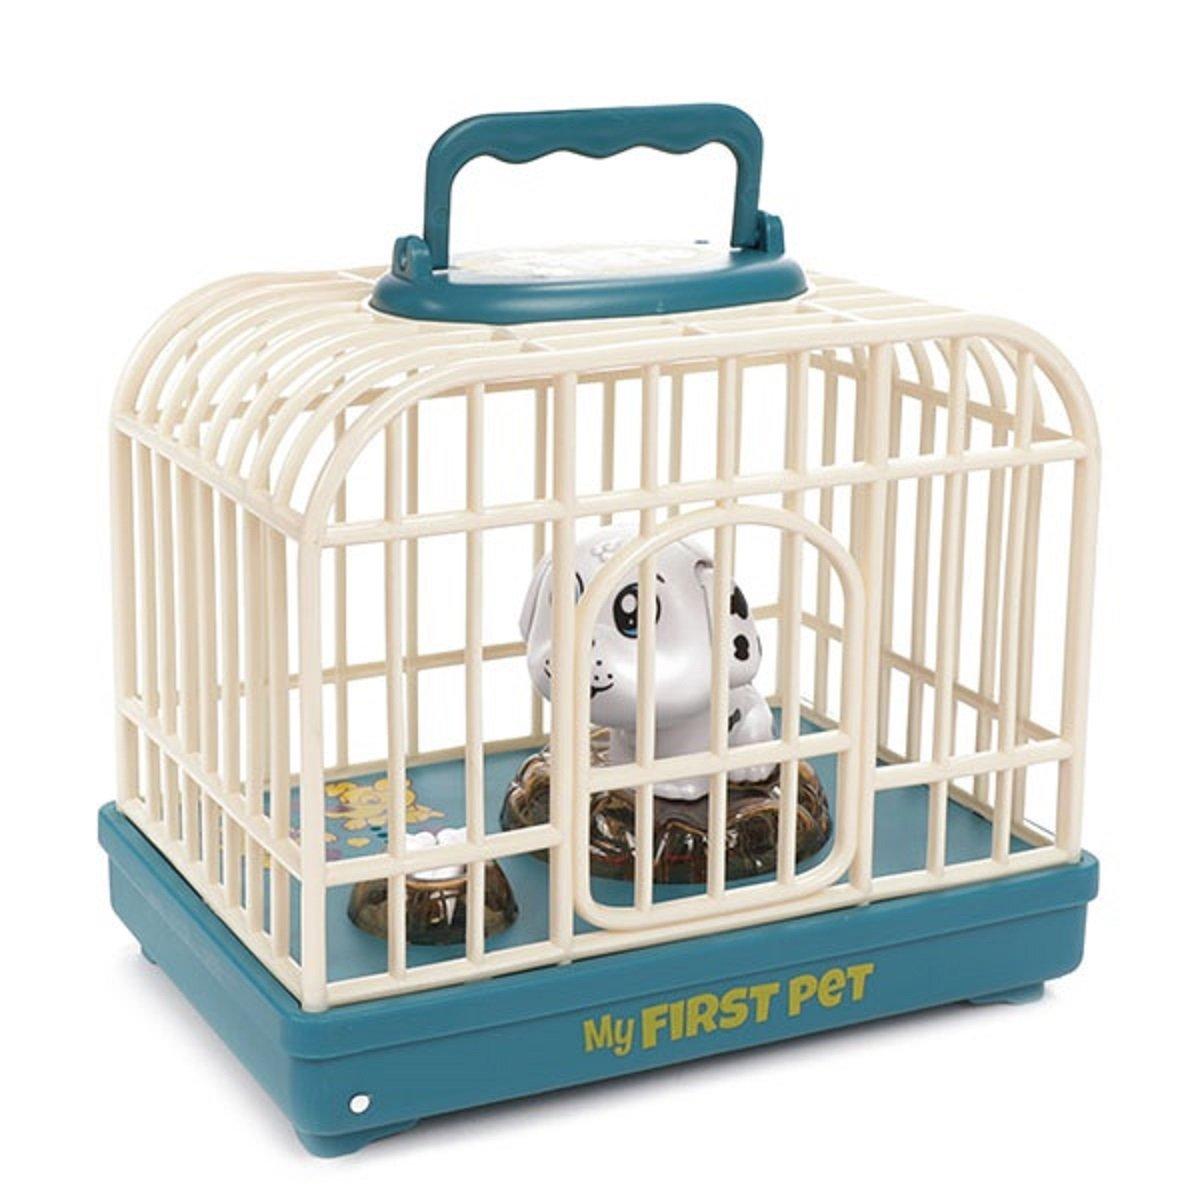 Toy Cage With Moving Dog Light And Sound 1pcs Assorted Design Sent Out